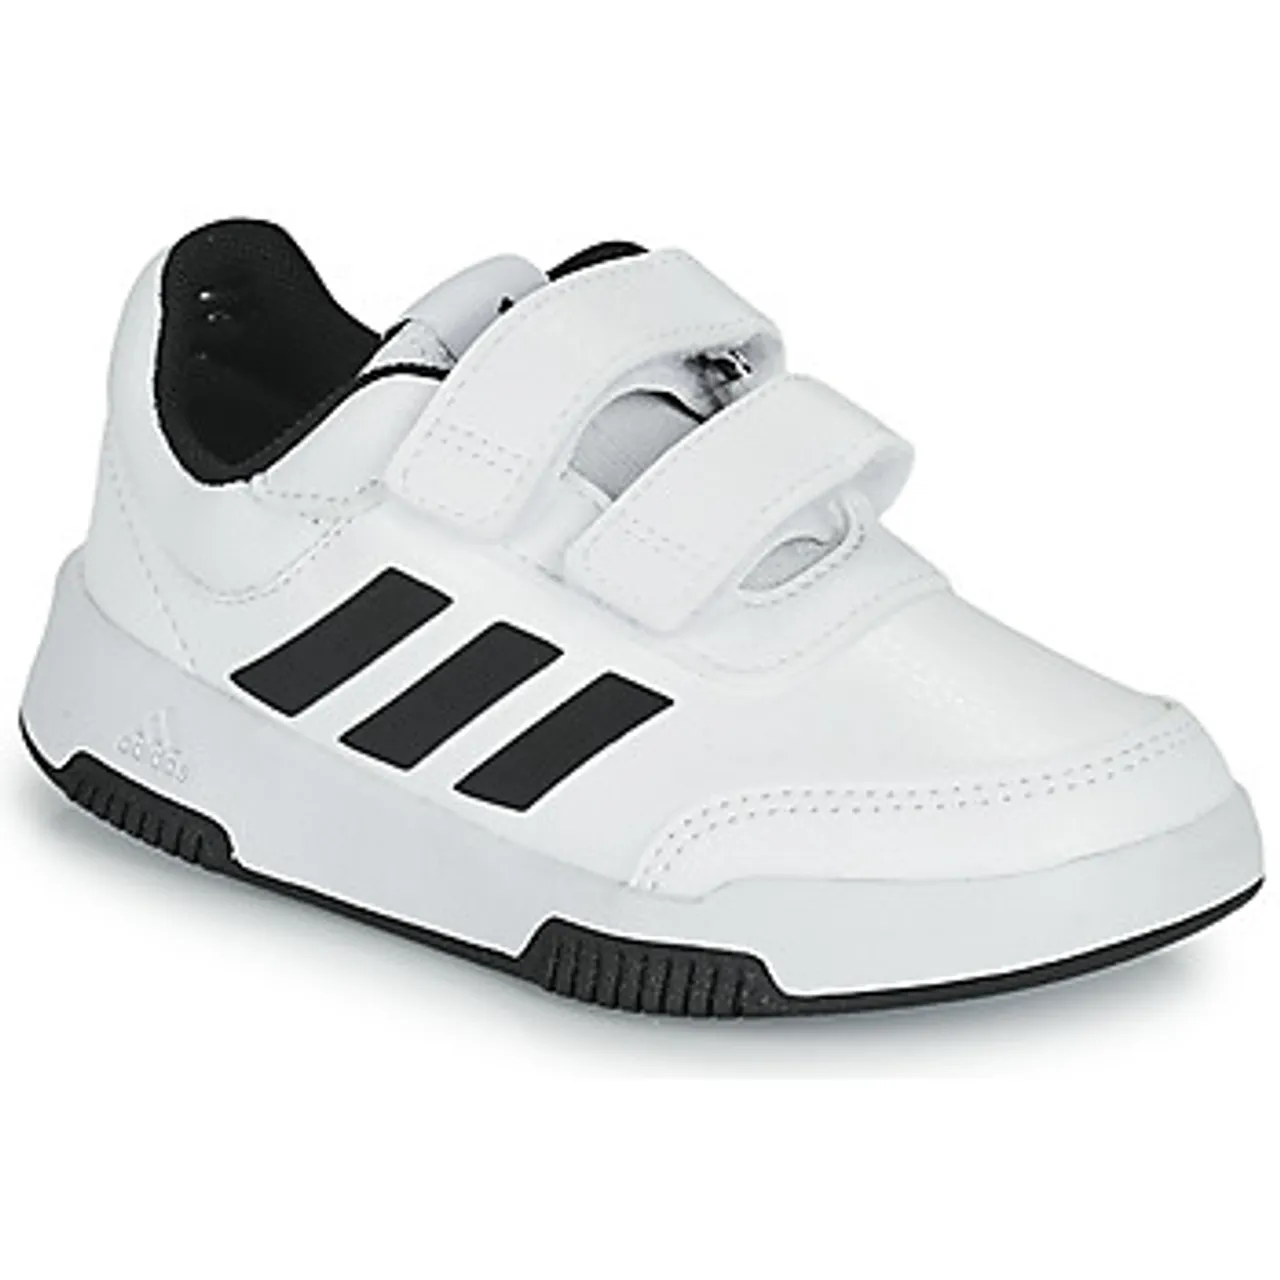 adidas  Tensaur Sport 2.0 C  boys's Children's Shoes (Trainers) in White